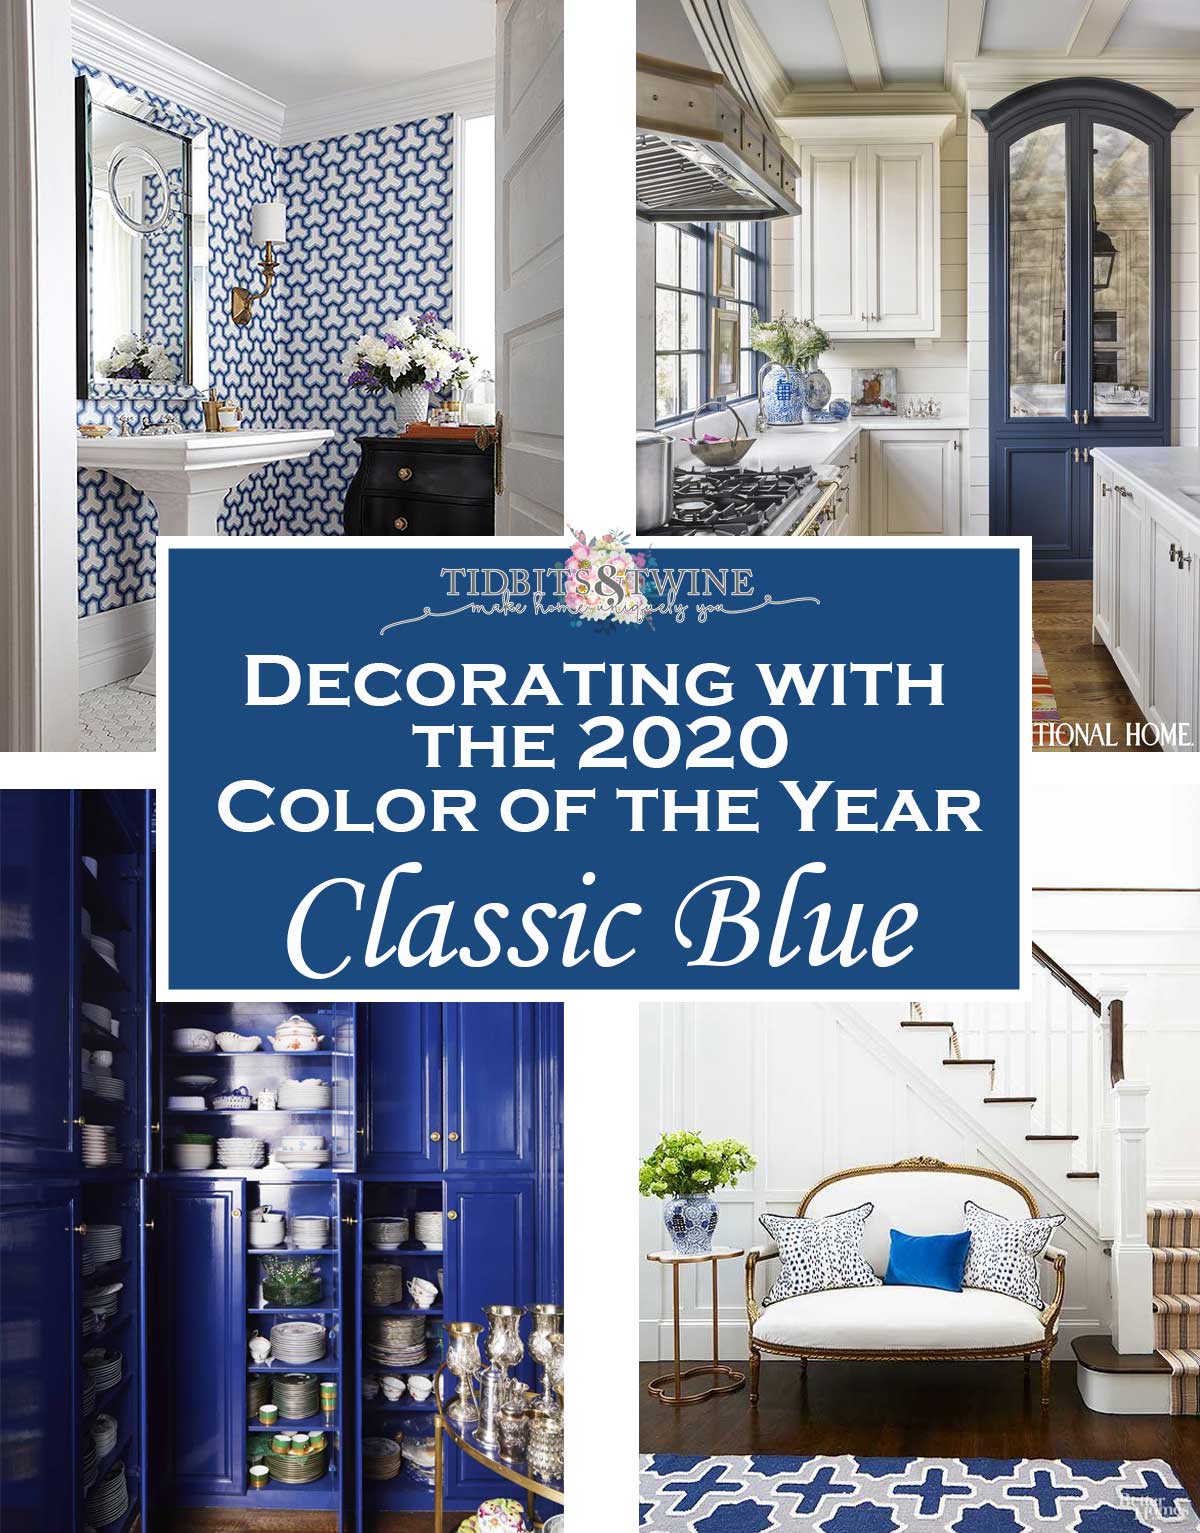 Decorating with Blue: A Modern Twist on a Classic Favorite